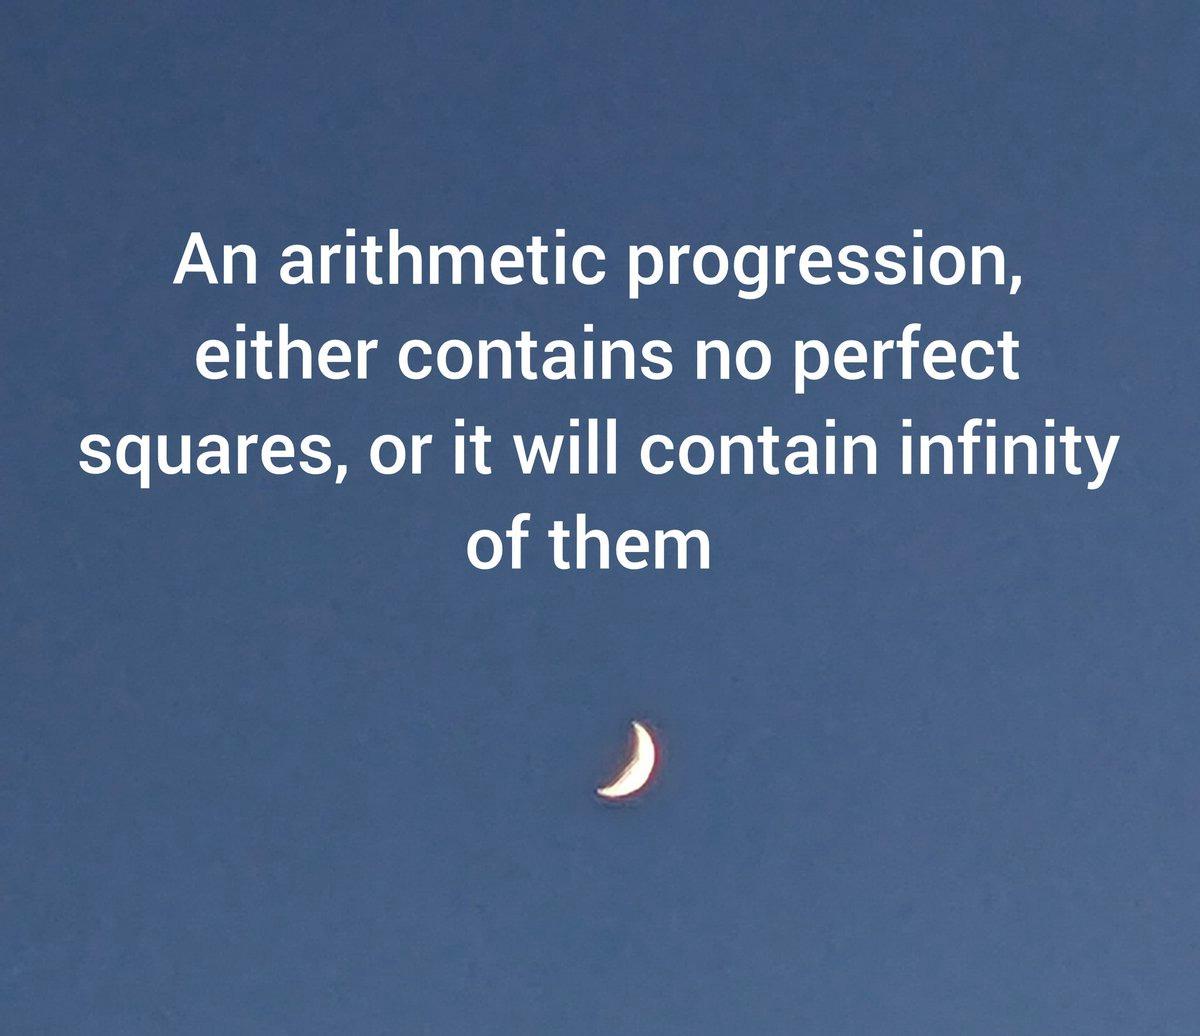 Text is displayed above a decorative crescent moon. The text states: "An arithmetic progression contains no perfect squares, or it will contain infinity of them."